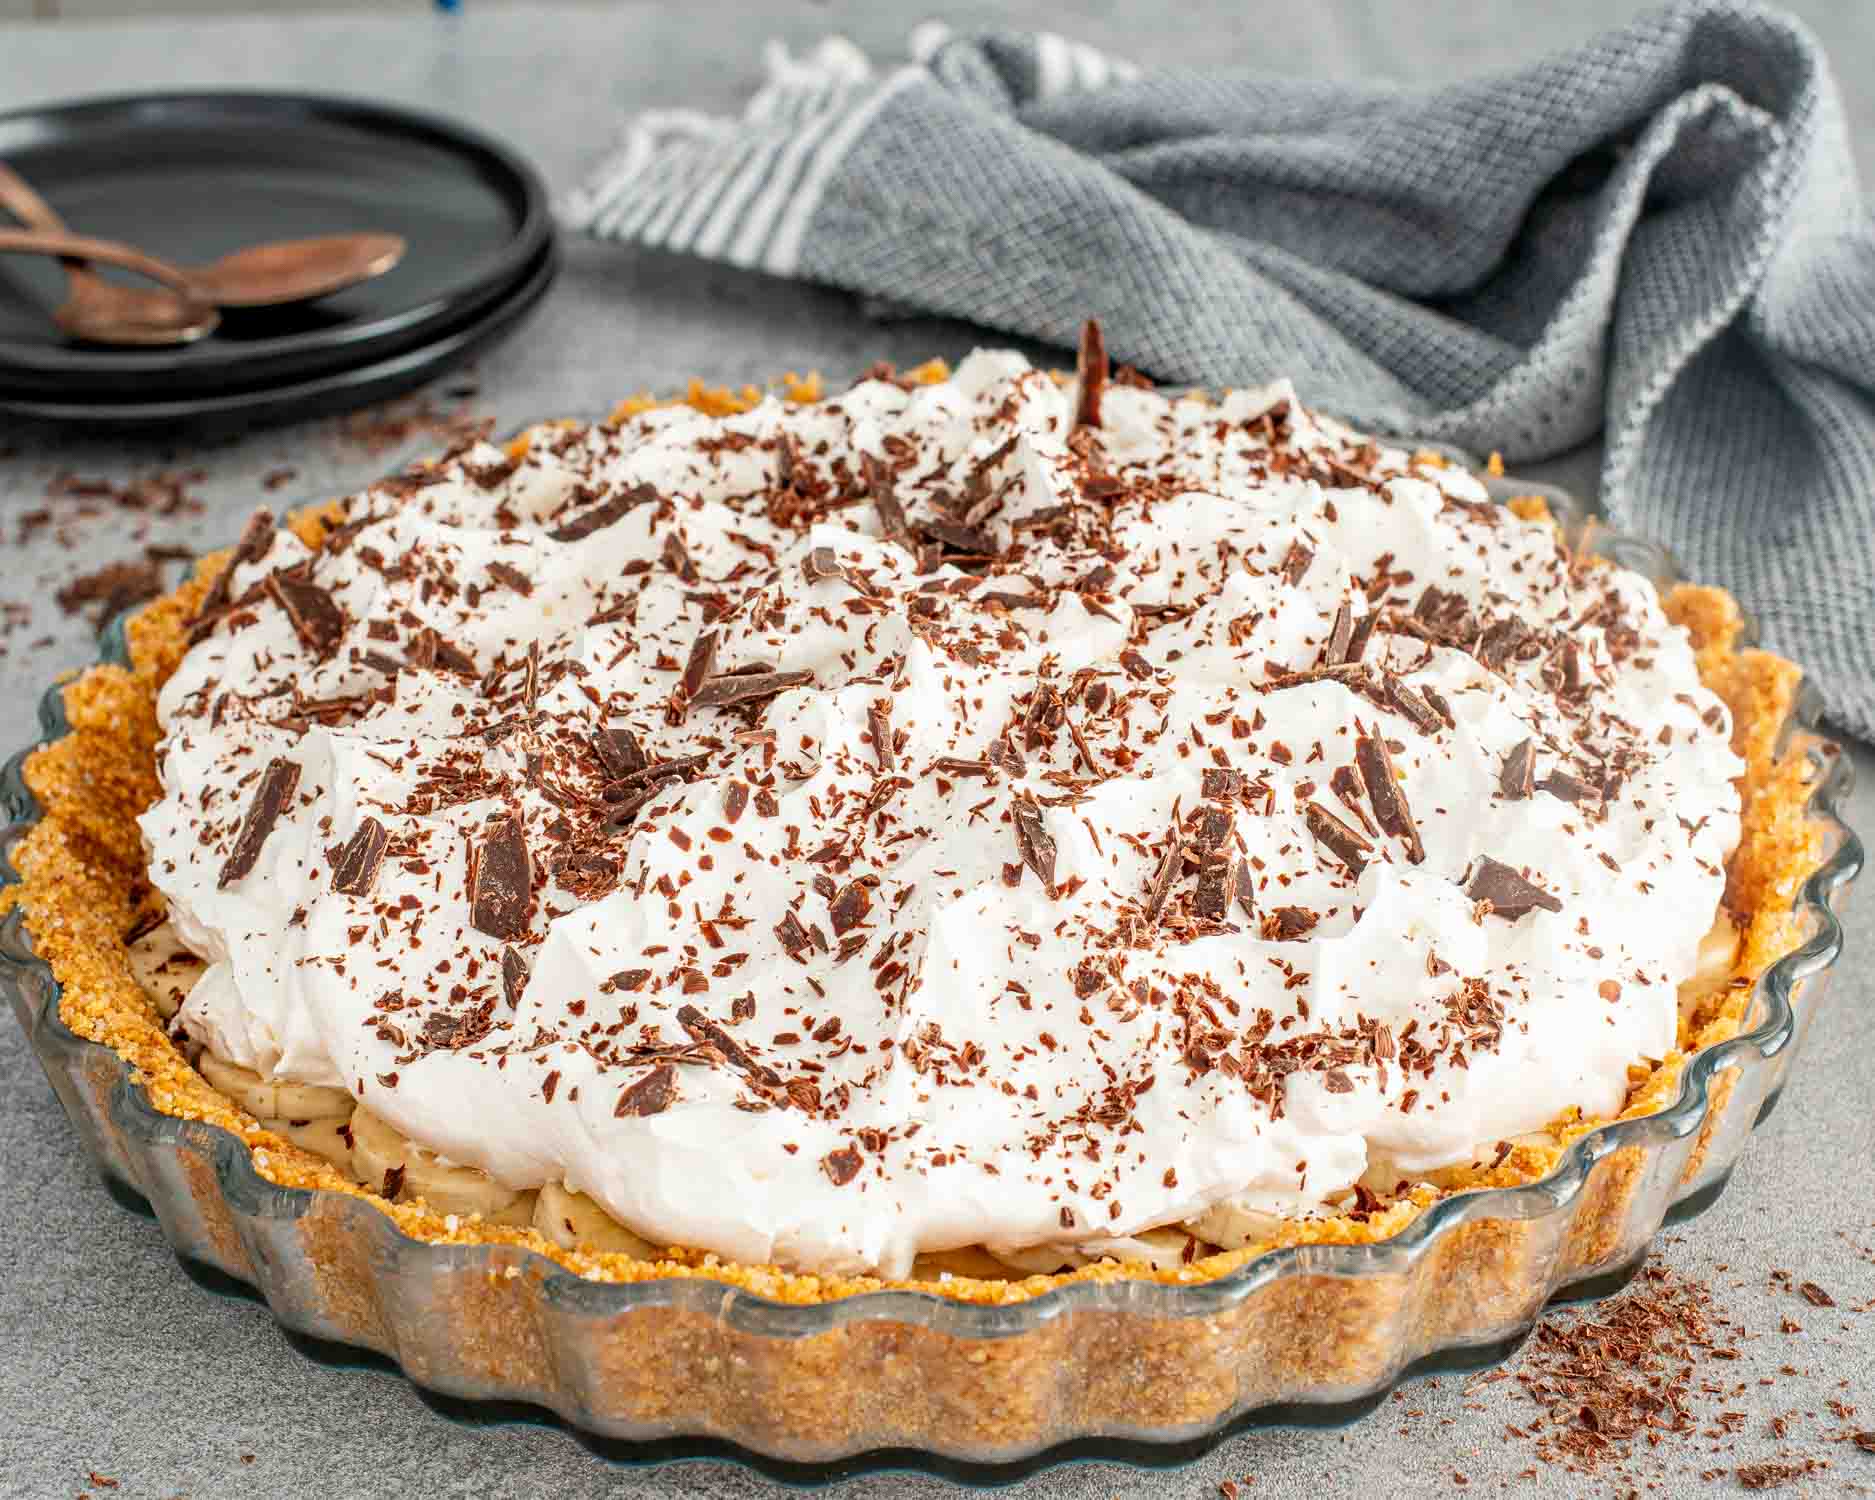 freshly made banoffee pie on a pie plate.